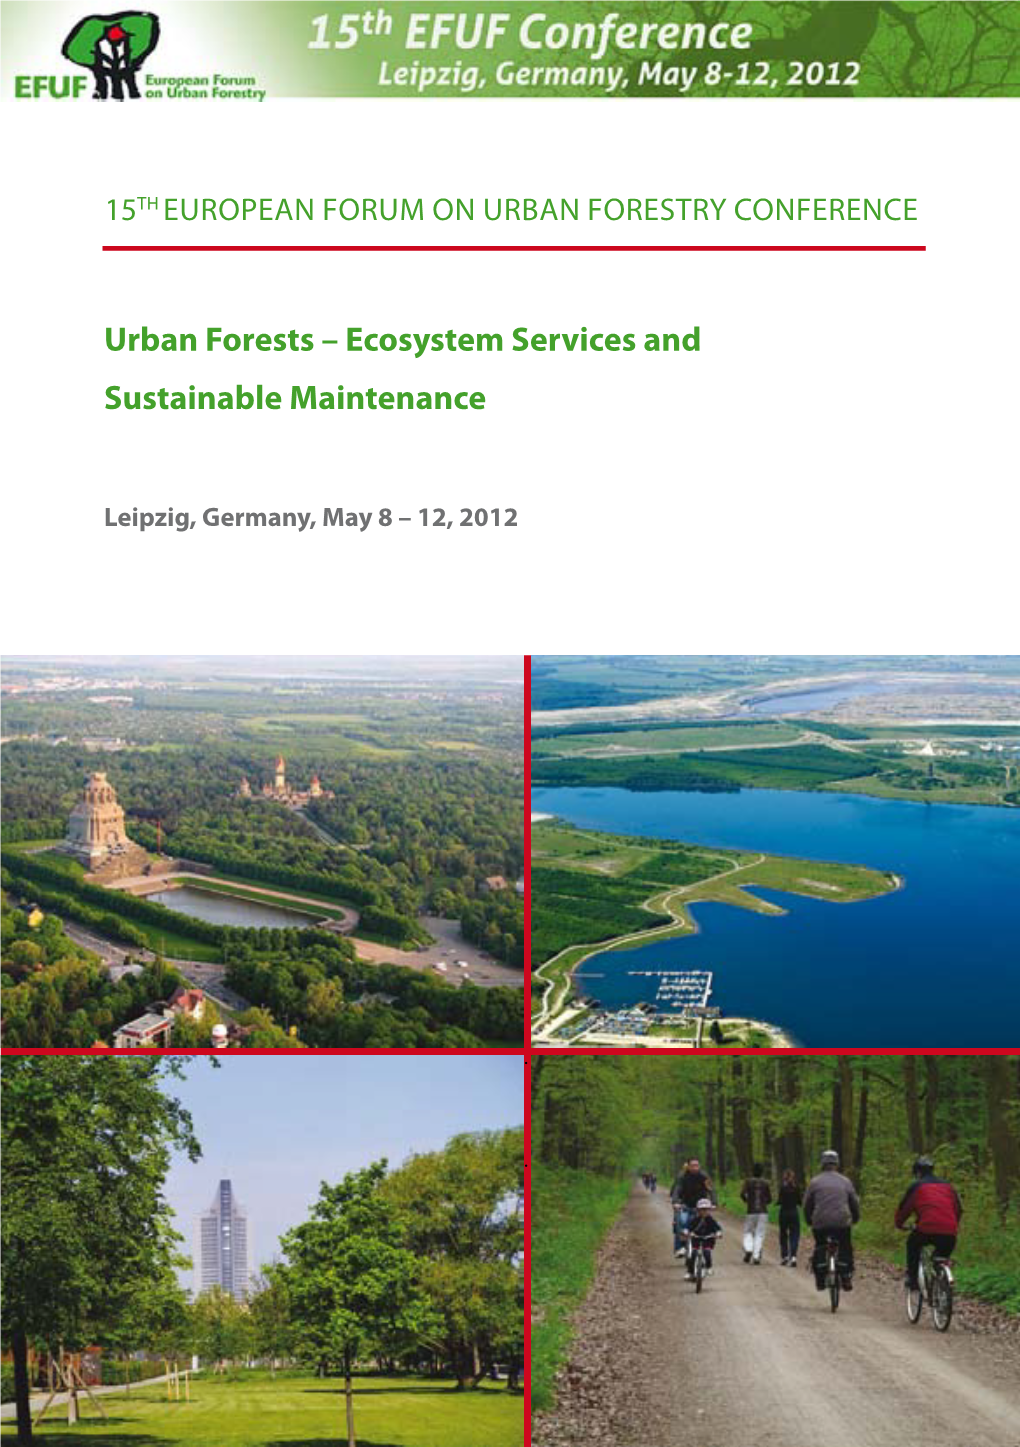 Urban Forests – Ecosystem Services and Sustainable Maintenance